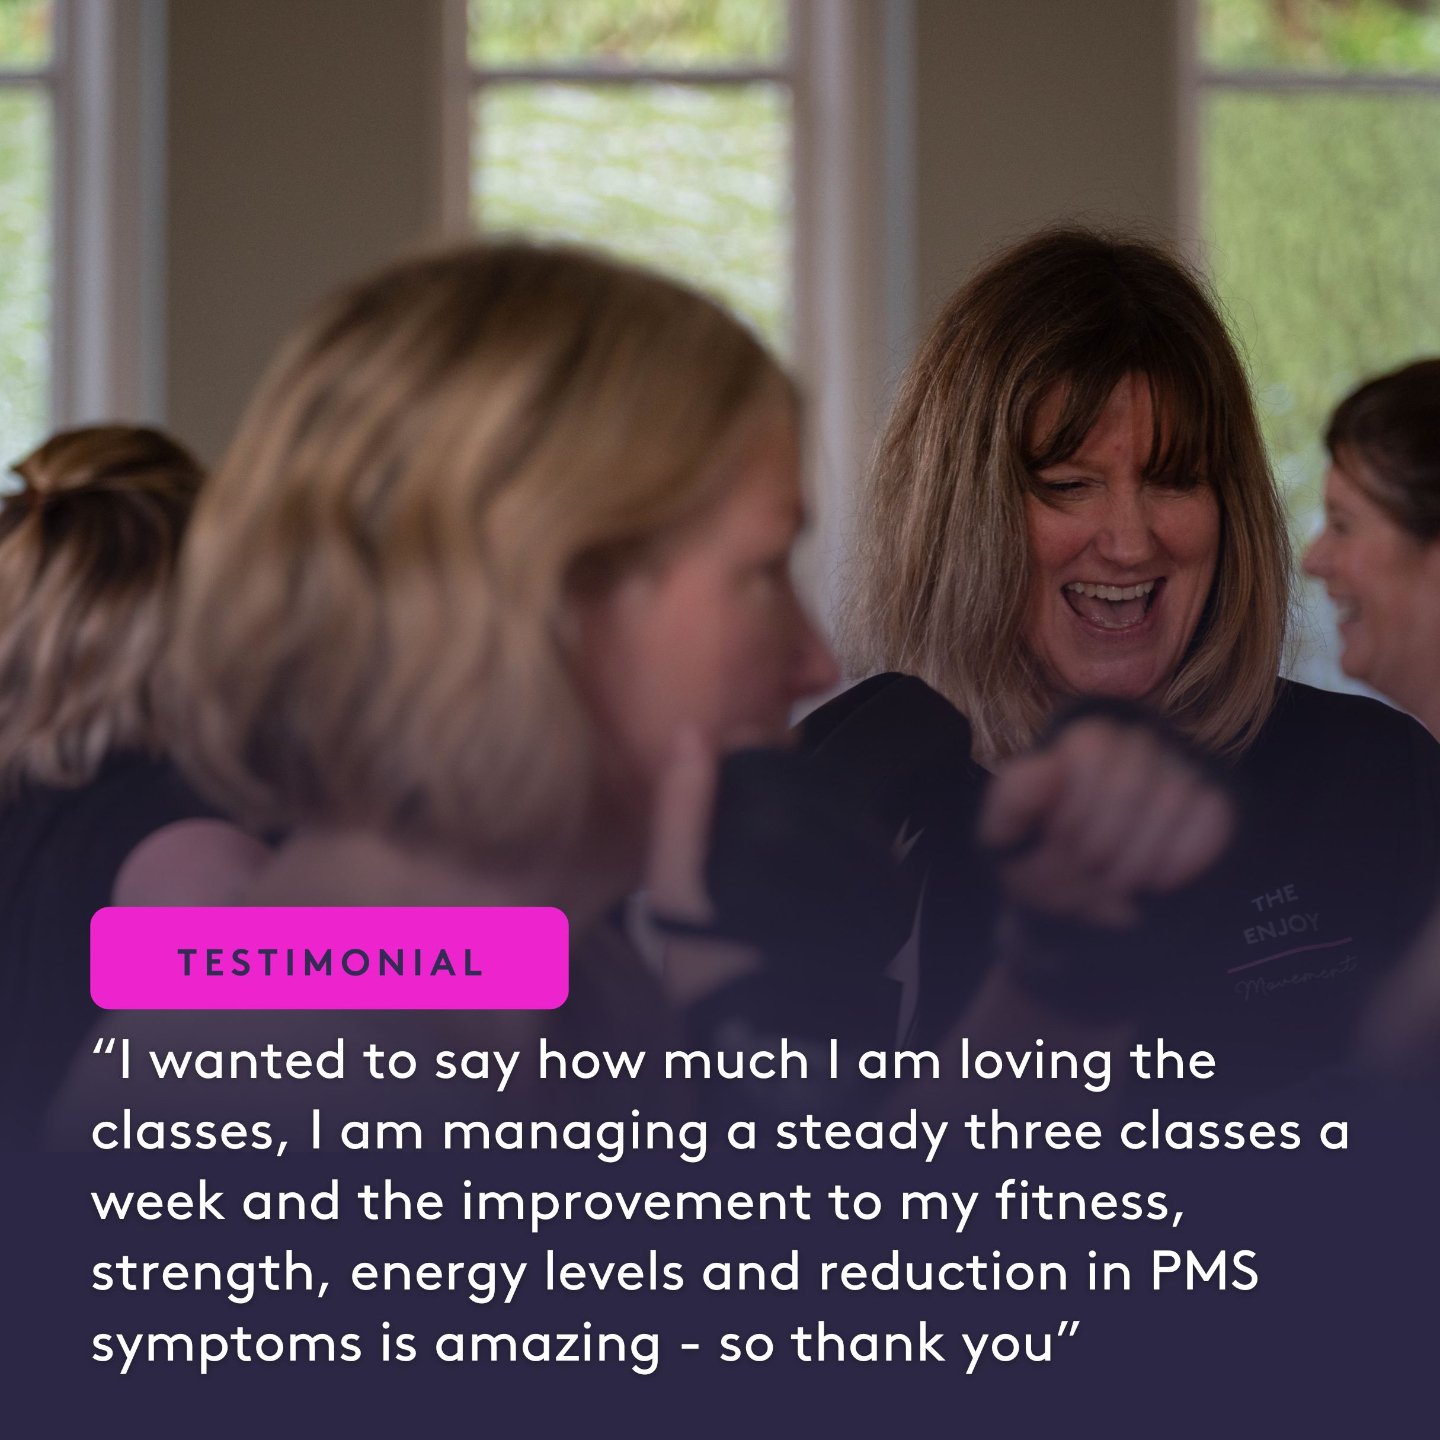 Testimonials like this are why we love our job. For us, fitness and moving your body isn&rsquo;t just about the obvious physical benefits- there are lots of great extra benefits from moving your body such as better sleep, improved energy and managing